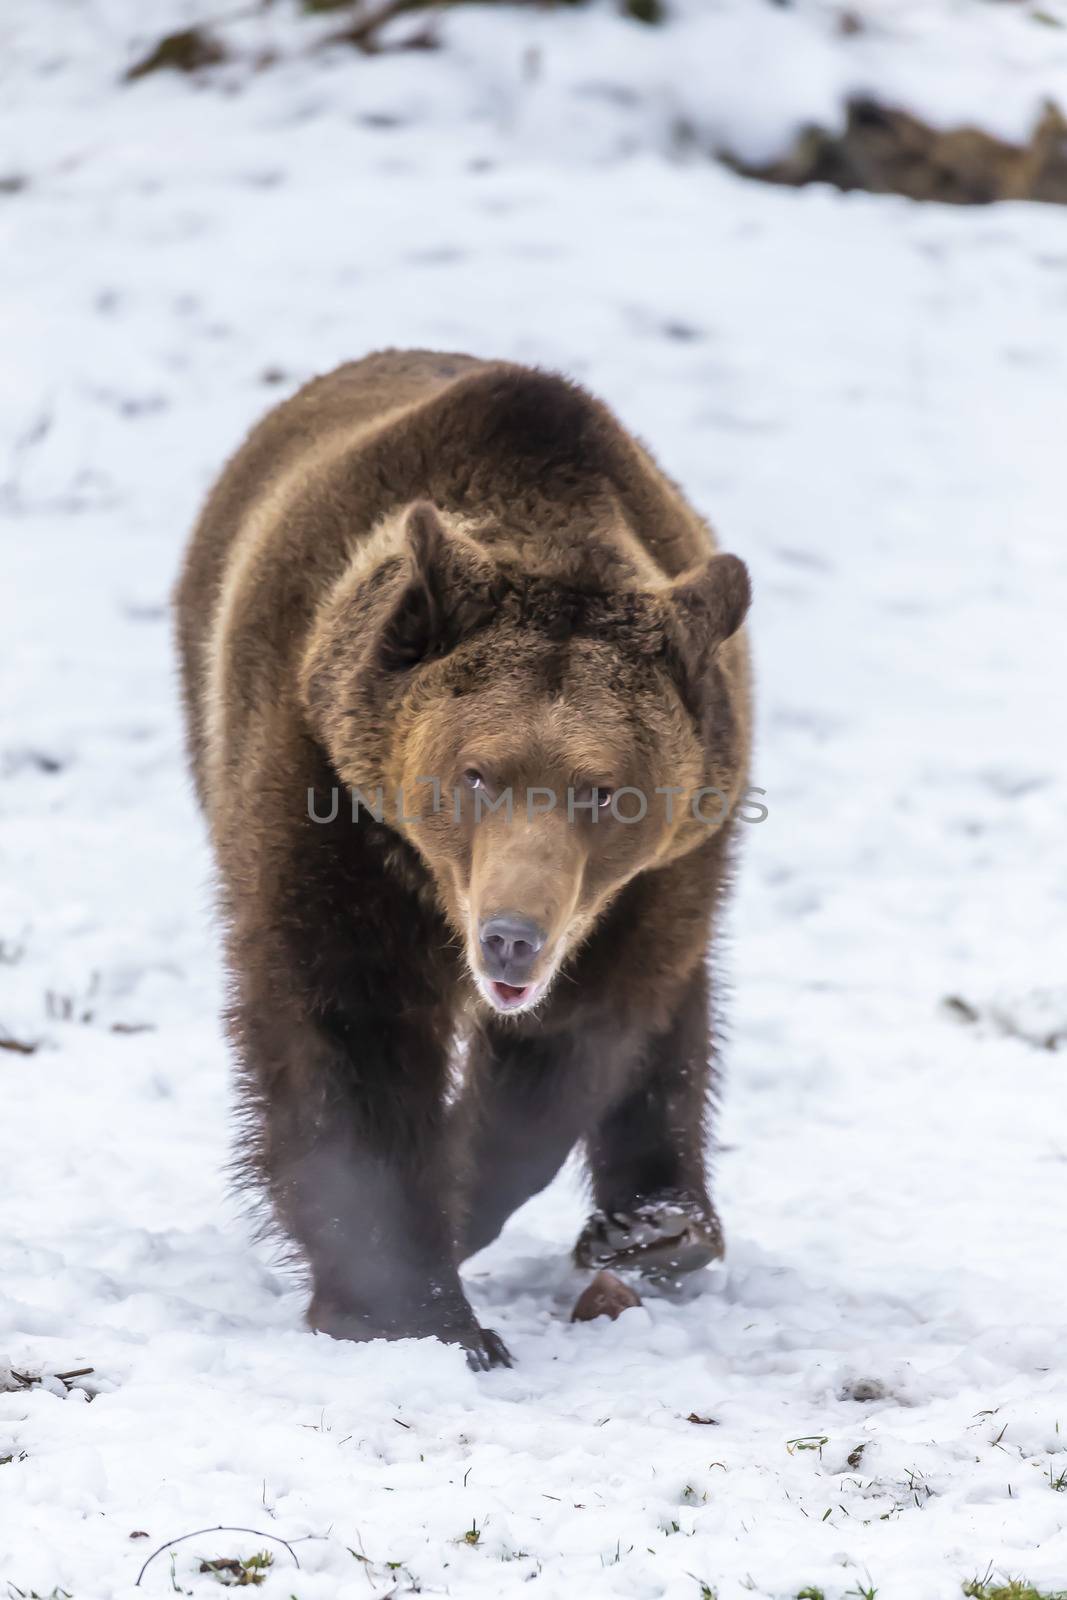 A Grizzly Bear enjoys the winter weather in Montana